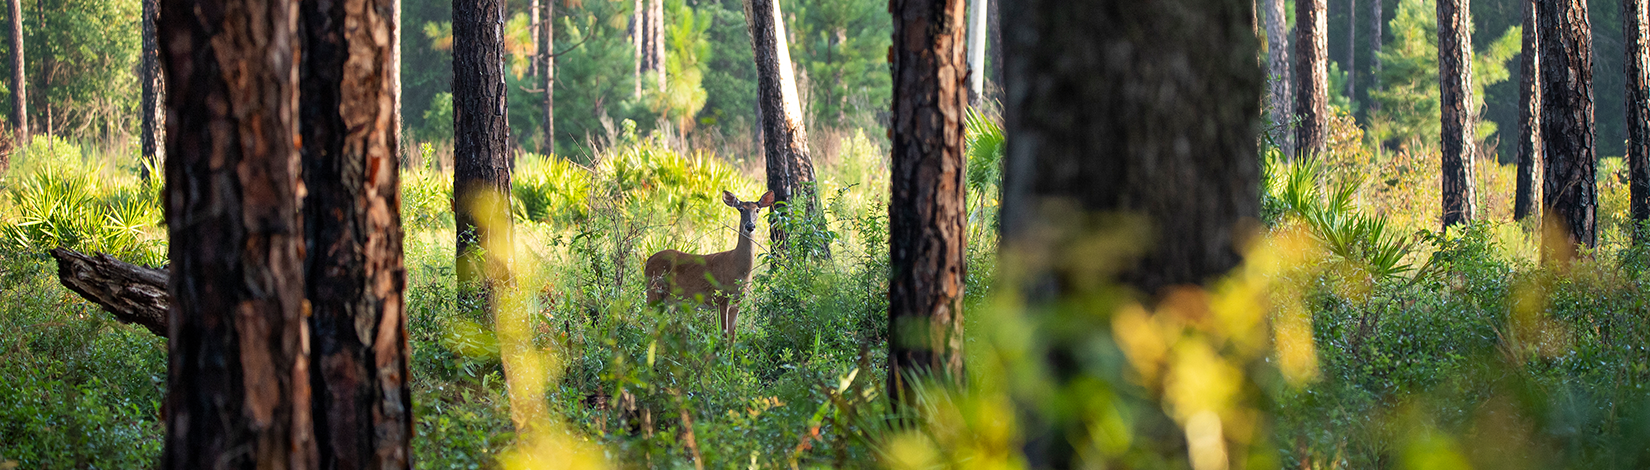 A doe (deer) stands among tall pine trees while staring at the camera for her picture. 